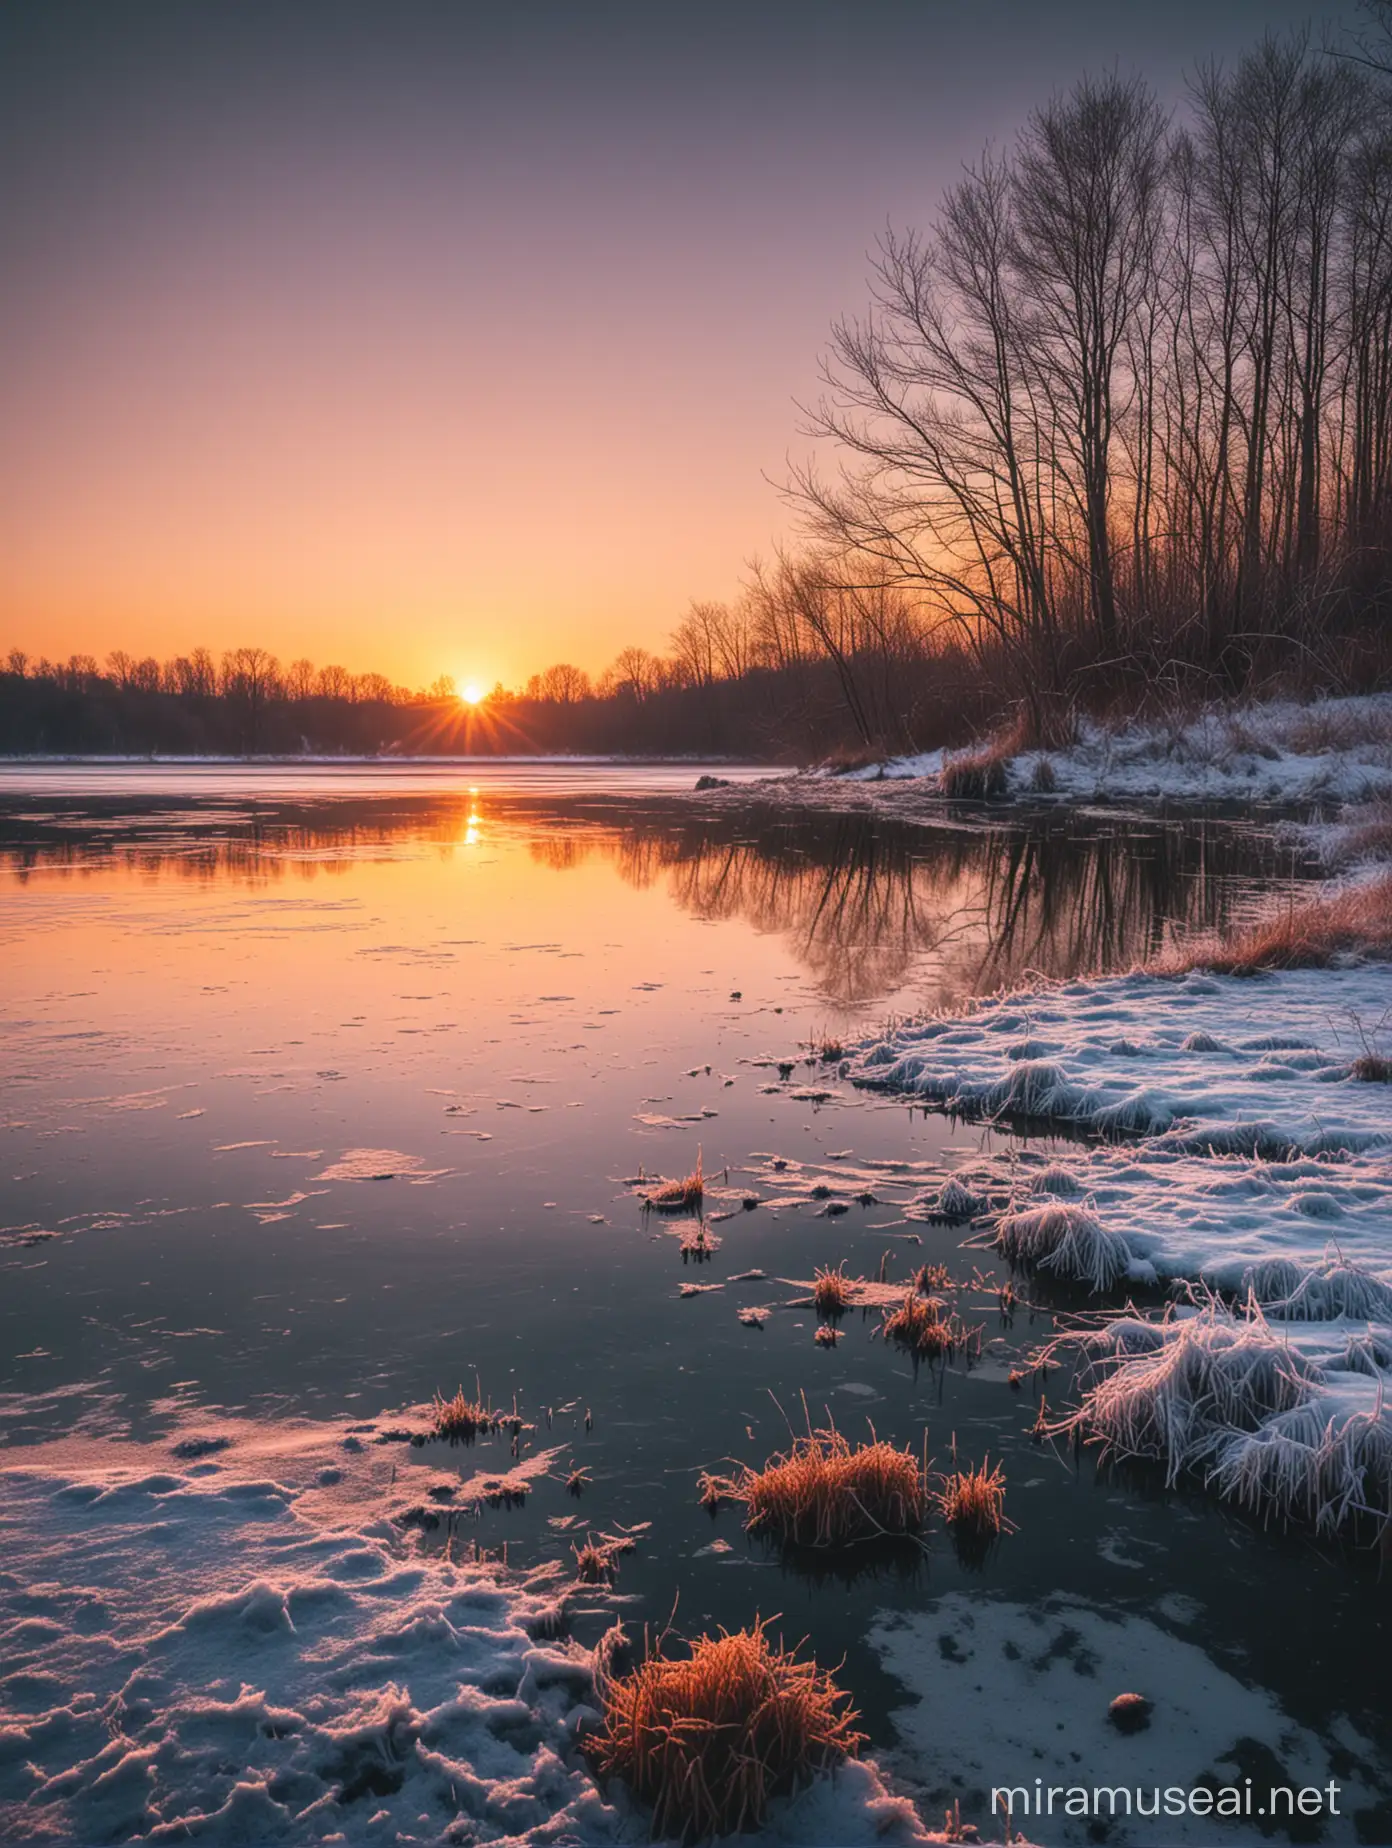 Tranquil Sunset Scene by the Frozen Lake